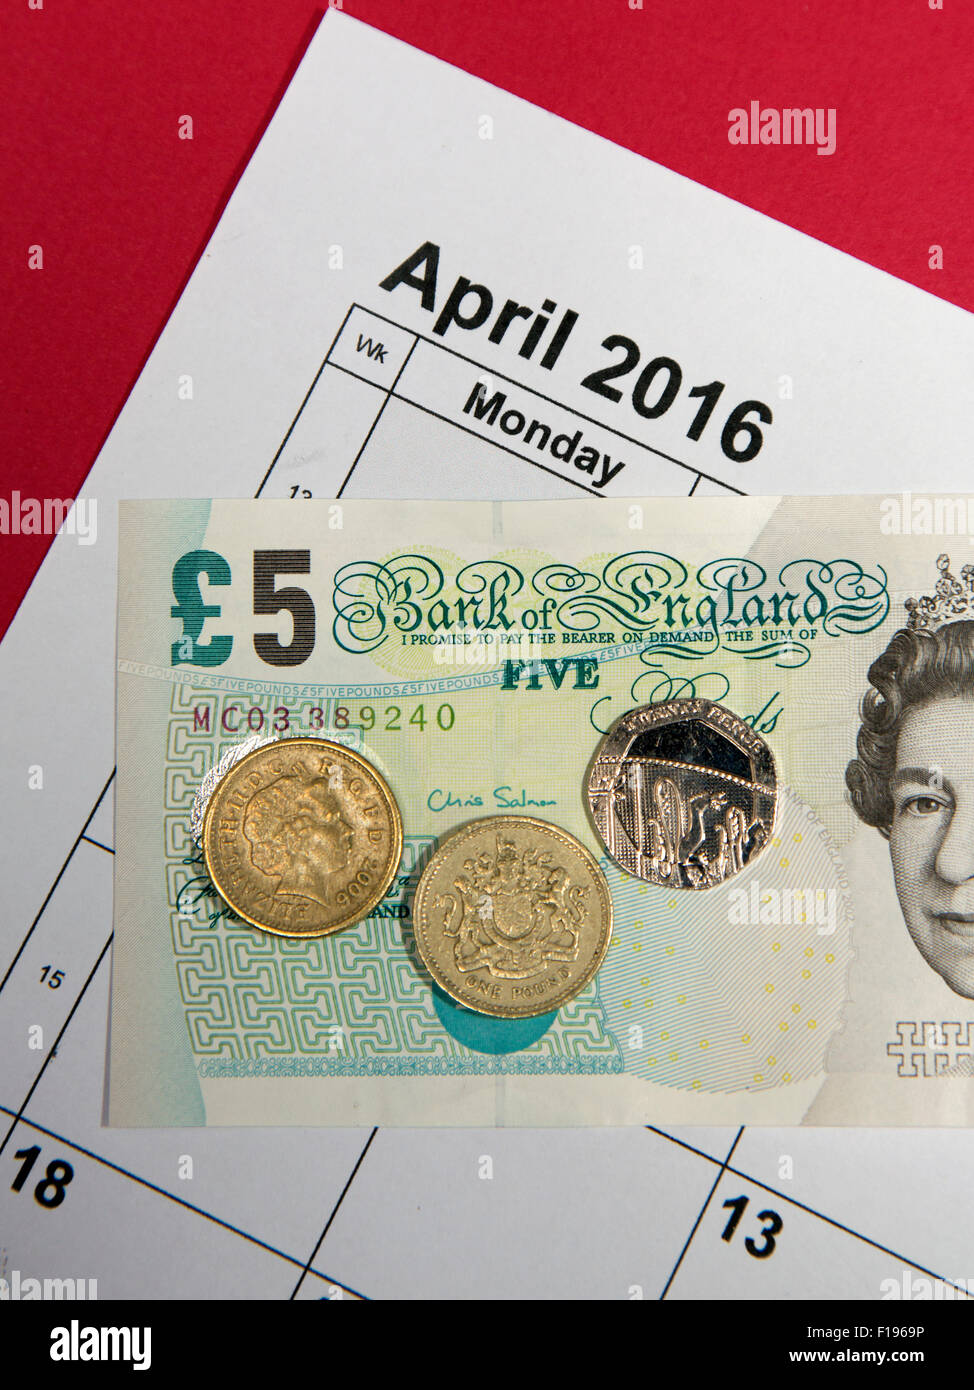 National Living Wage £7.20 from April 2016, London Stock Photo